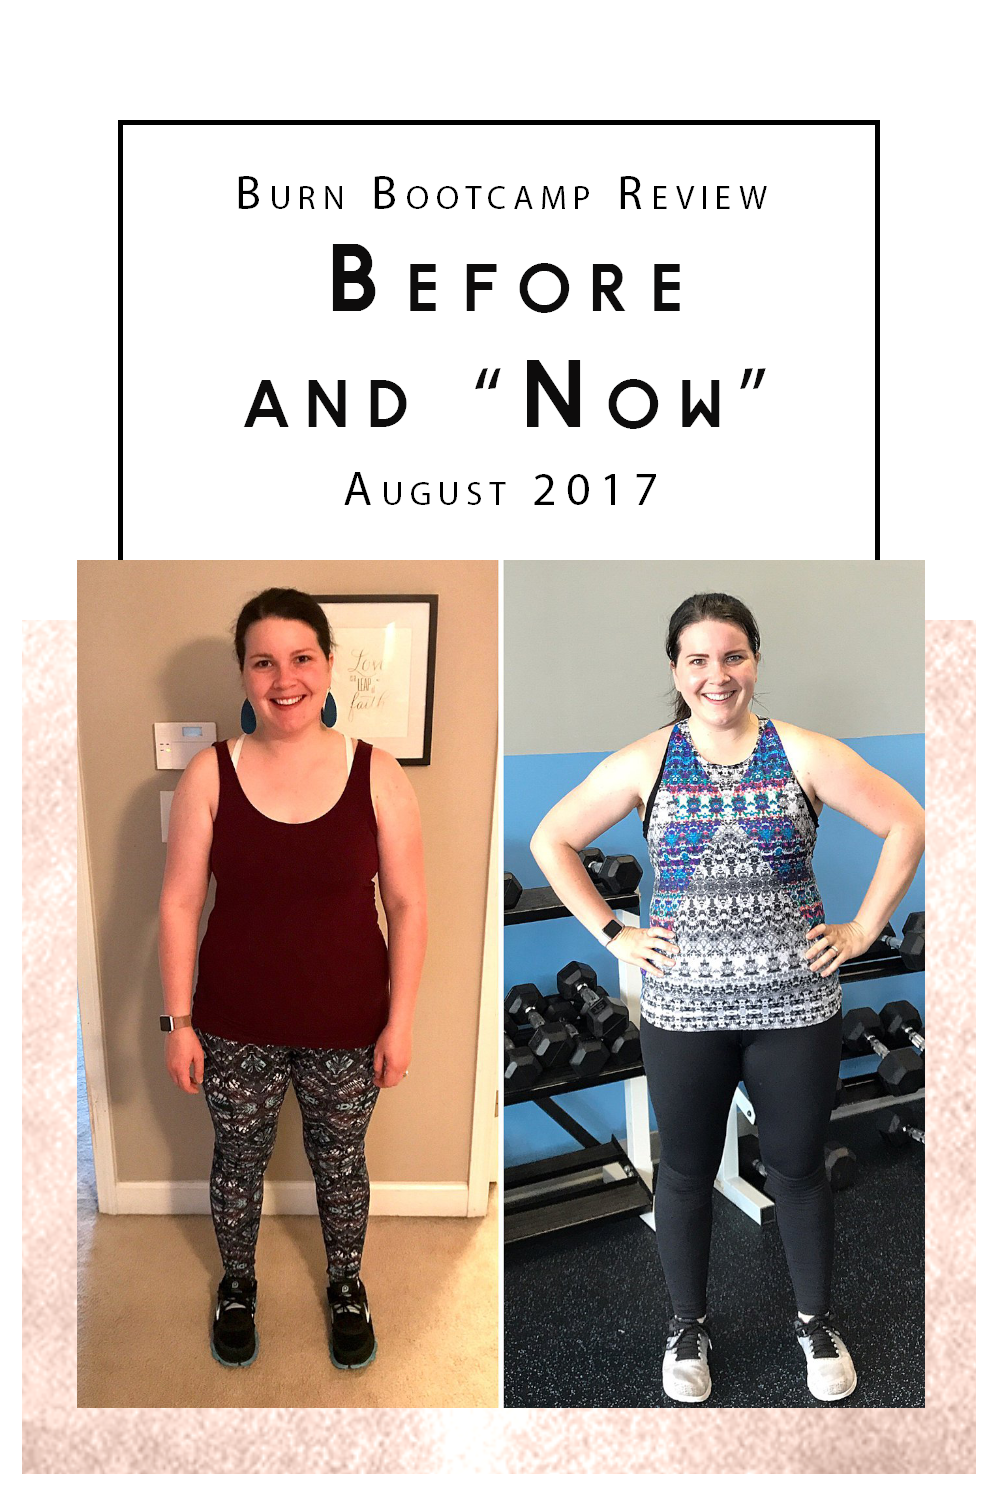 Burn Bootcamp Review - Fitness Update (13) - Fitness Update! Burn Boot Camp Review by NC blogger Still Being Molly